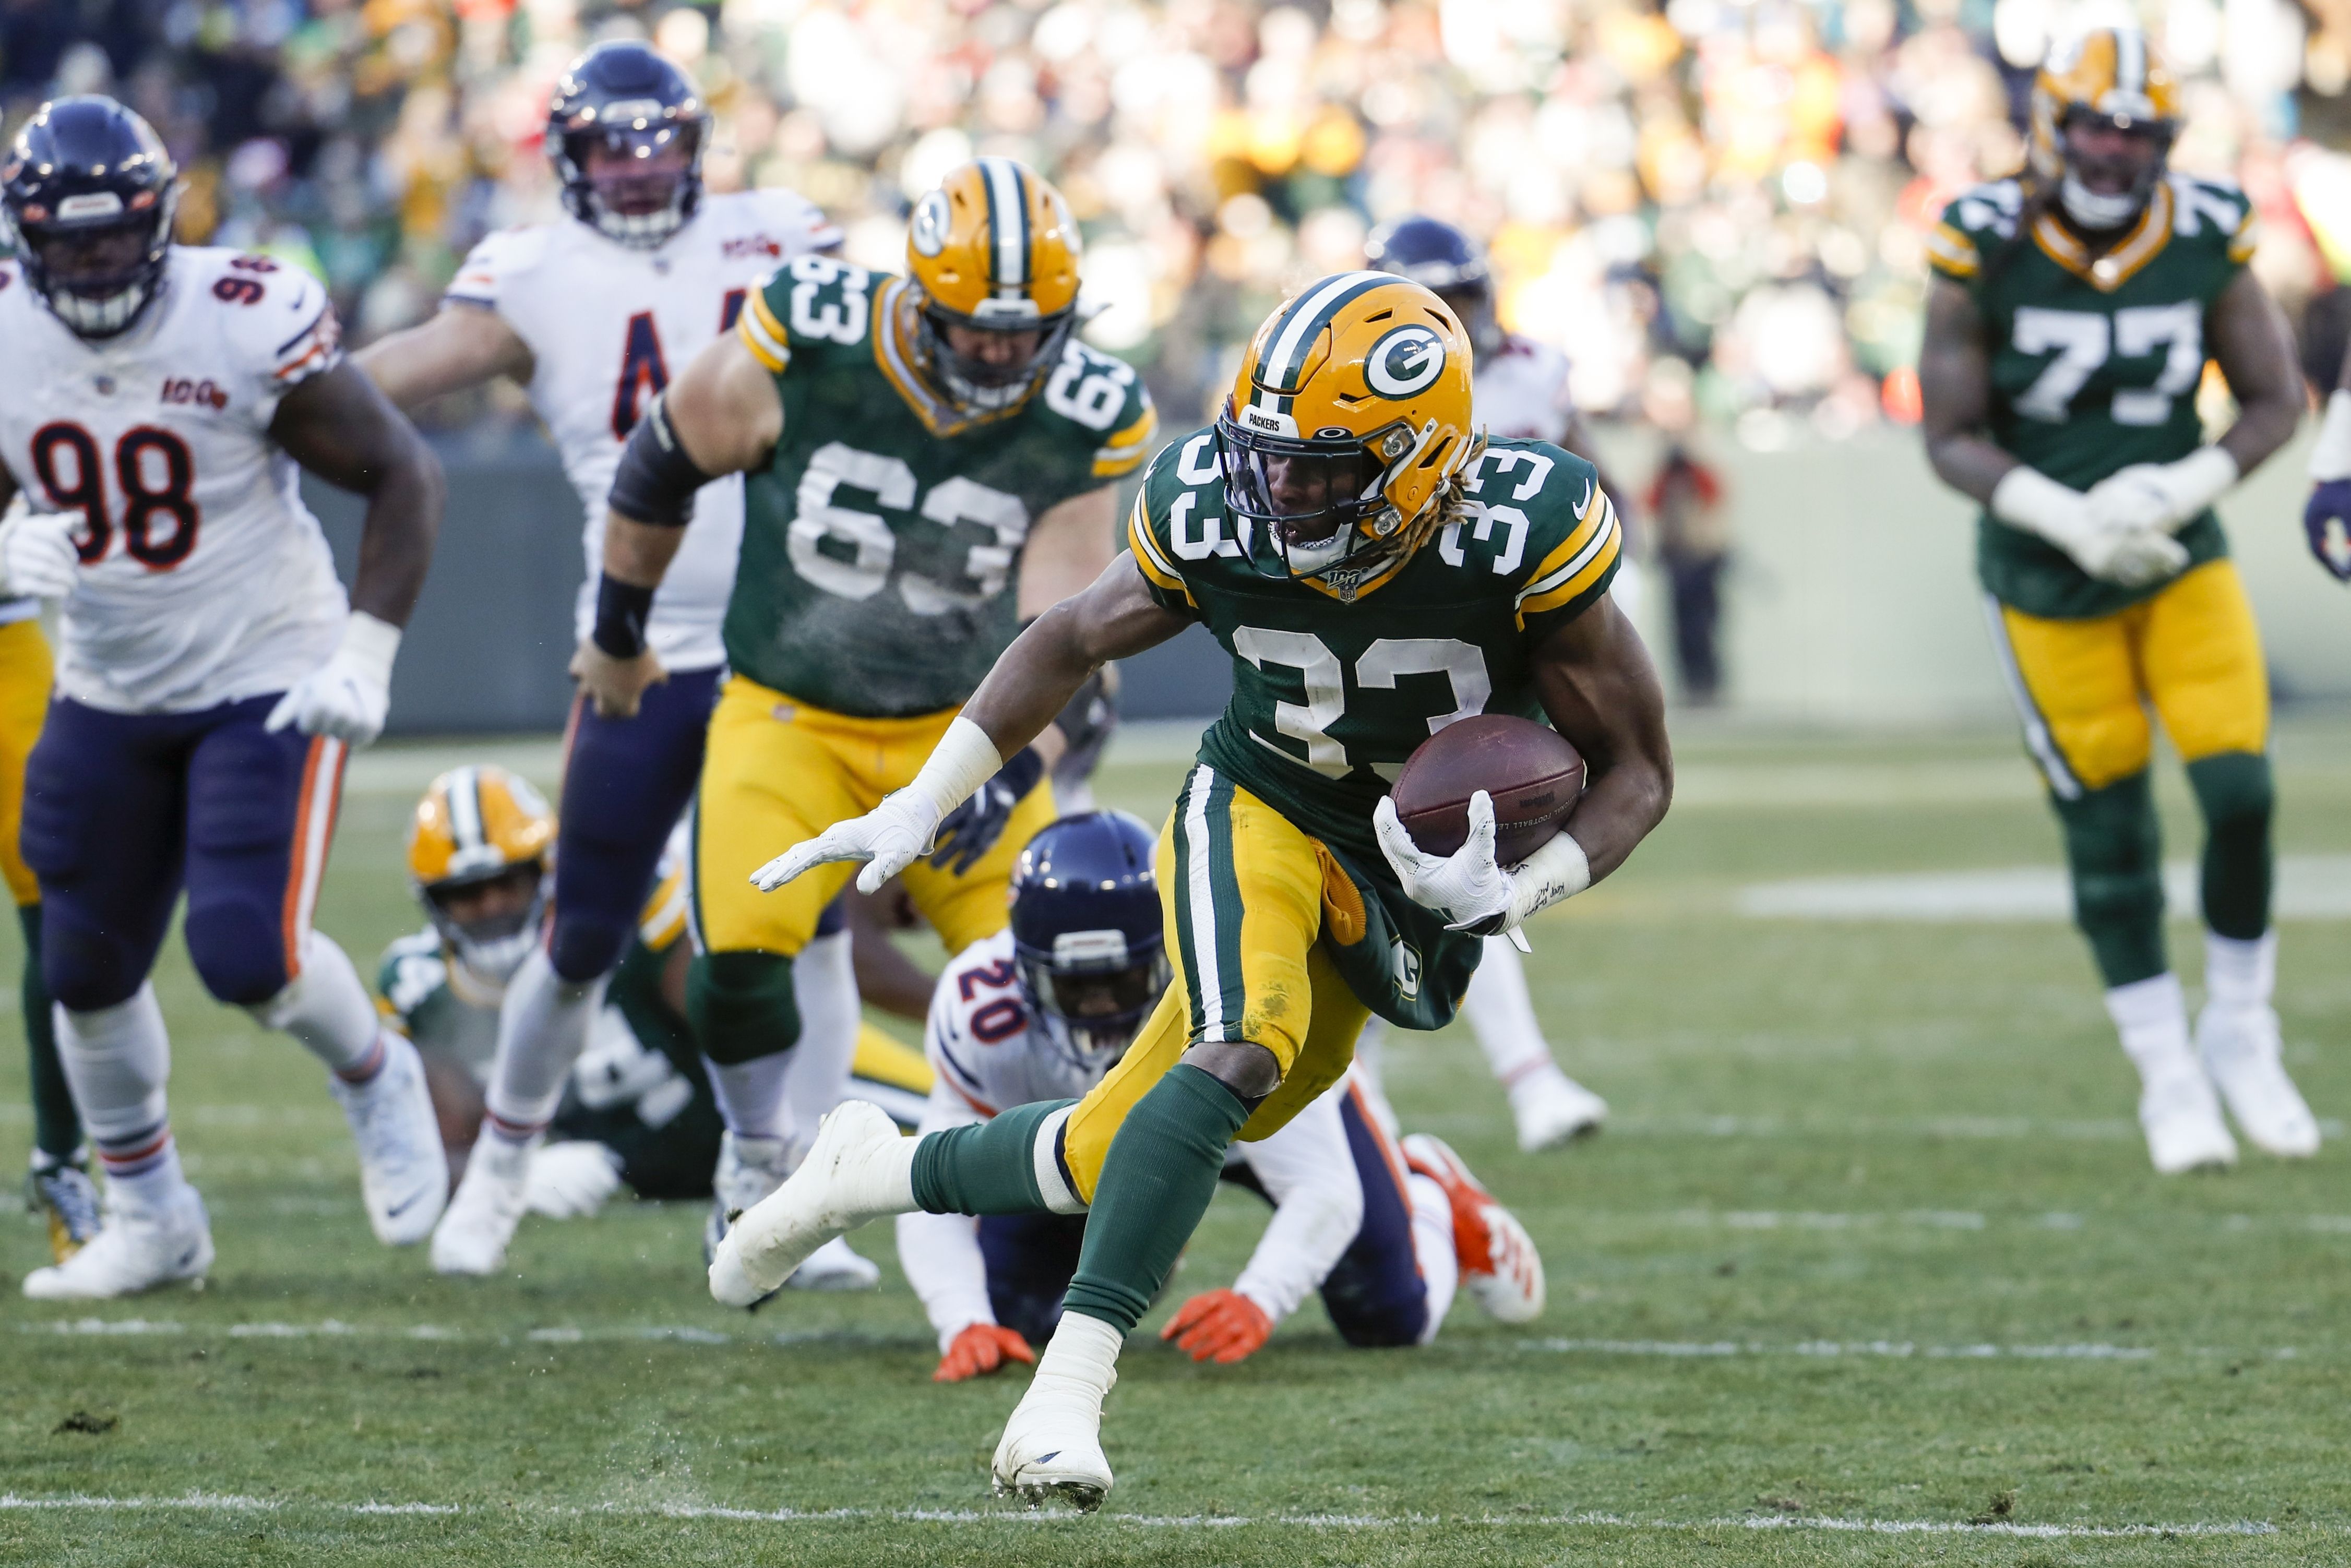 Green Bay Packers hold off the Chicago Bears: Recap, score, stats and more  